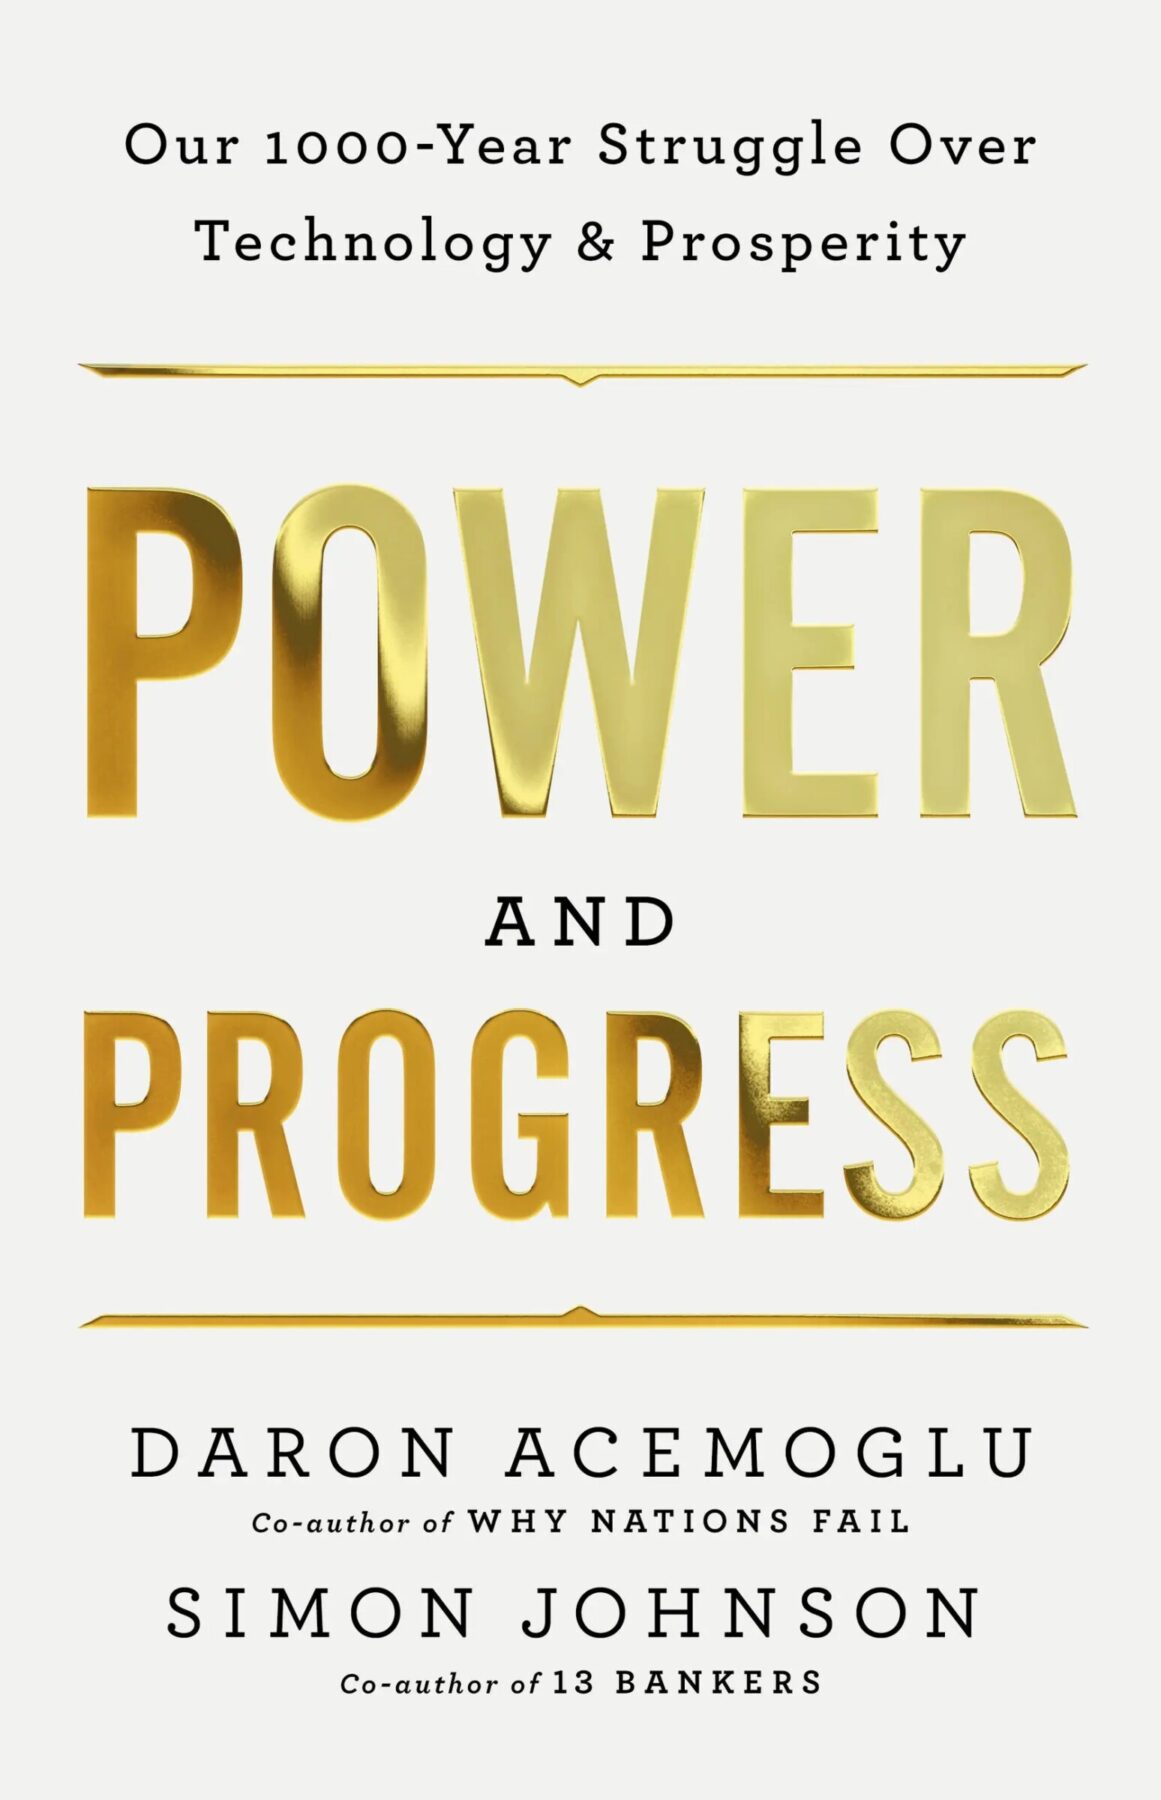 "Power and Progress: Our Thousand-Year Struggle Over Technology and Prosperity" by Daron Acemoglu and Simon Johnson